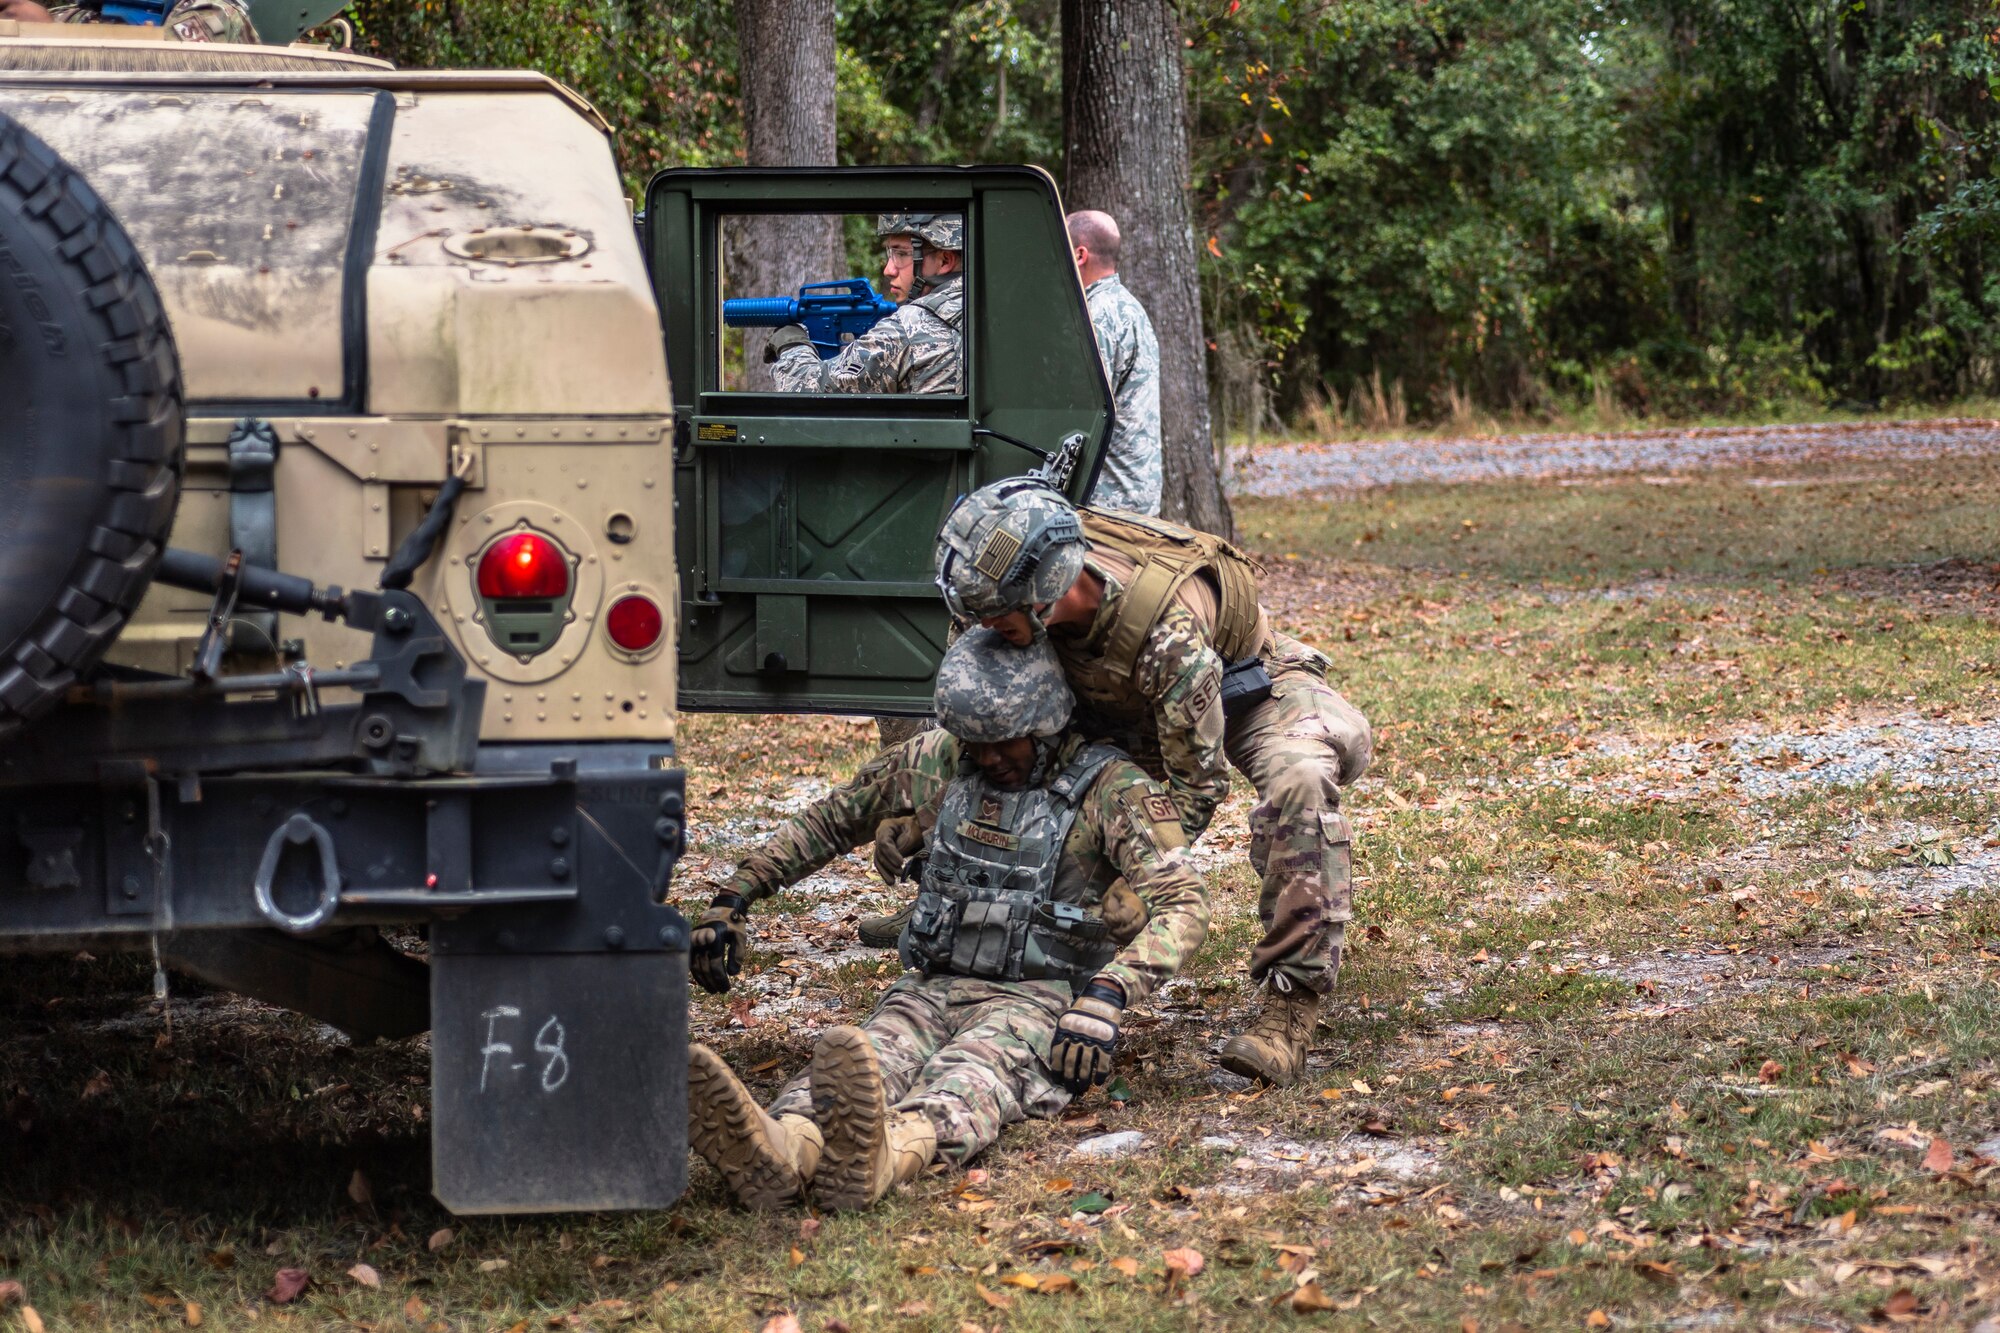 Senior Airman Daniel Boone, 23d Security Forces Squadron (SFS) installation patrolman, carries a simulated casualty during a field convoy operation Oct. 8, 2019, at Moody Air Force Base, Ga. The field convoy operation gave 23d SFS Airmen an opportunity to improve the ability to shoot, move and communicate, ensuring the Airmen are properly trained and prepared to carry out their mission in a contested environment. (U.S. Air Force photo by Airman 1st Class Taryn Butler)